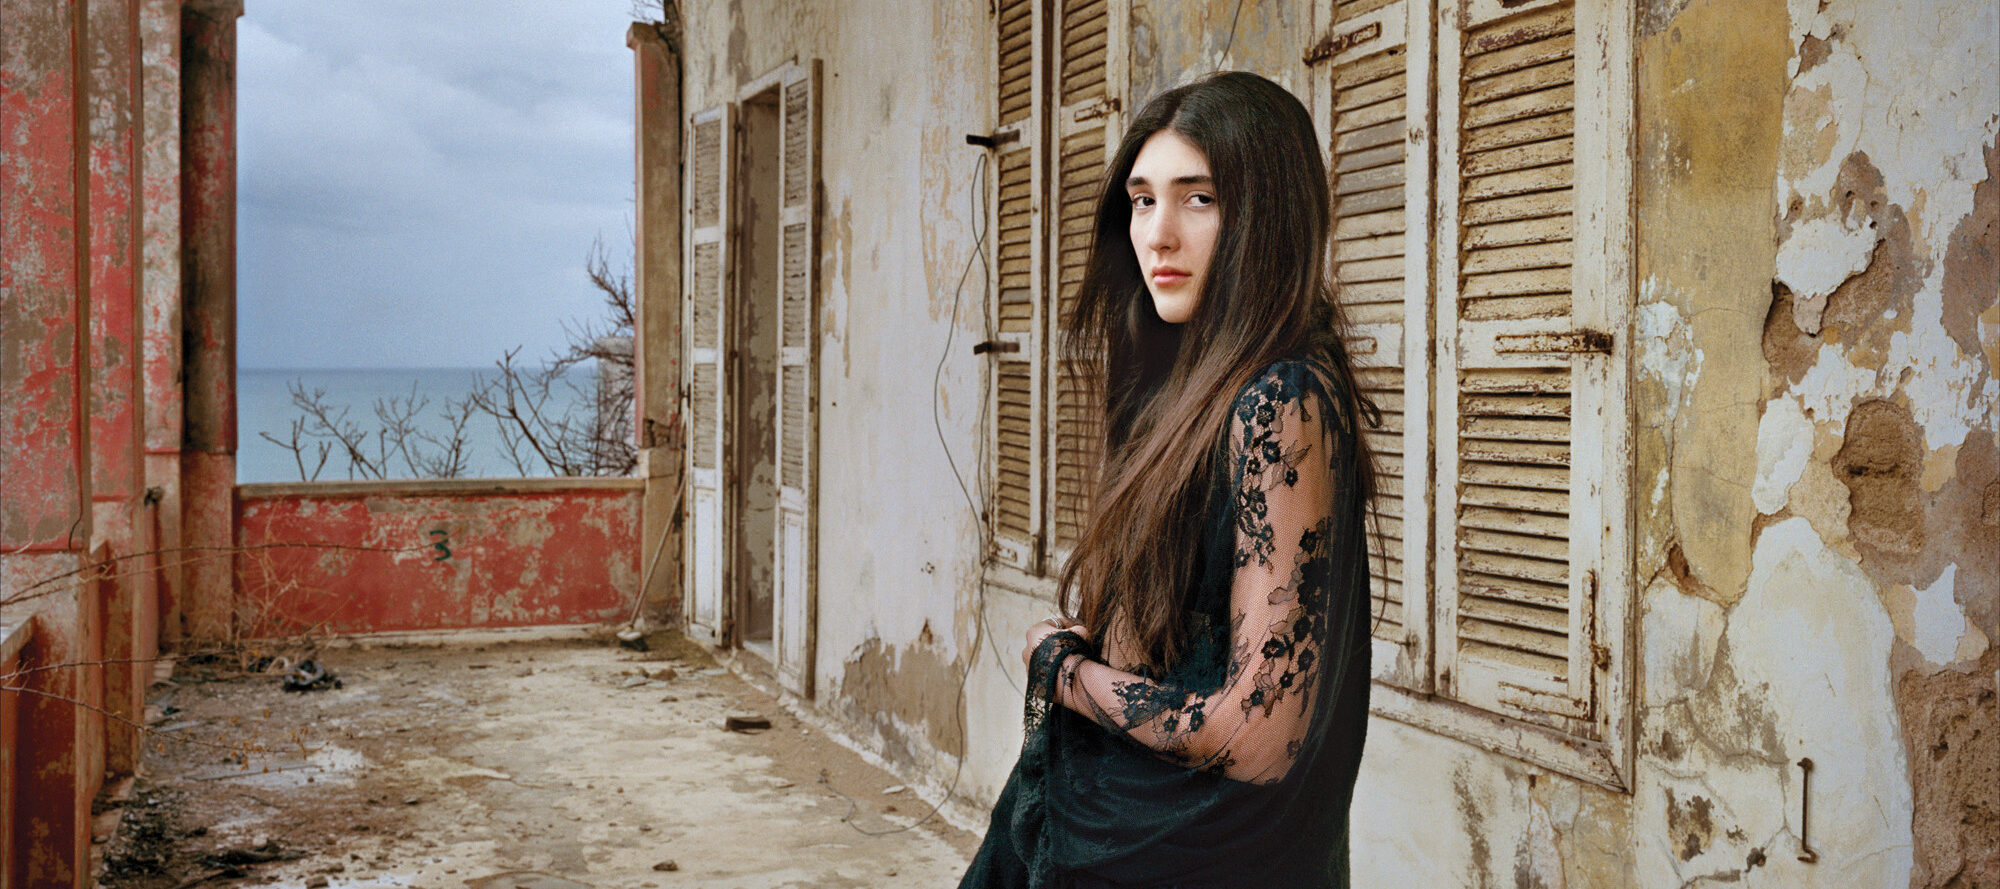 A light-skinned young woman with long, dark brown hair in a black, long lace sleeved dress stands confidently in a crumbling loggia. She gazes at the viewer with a serious, captivating look.